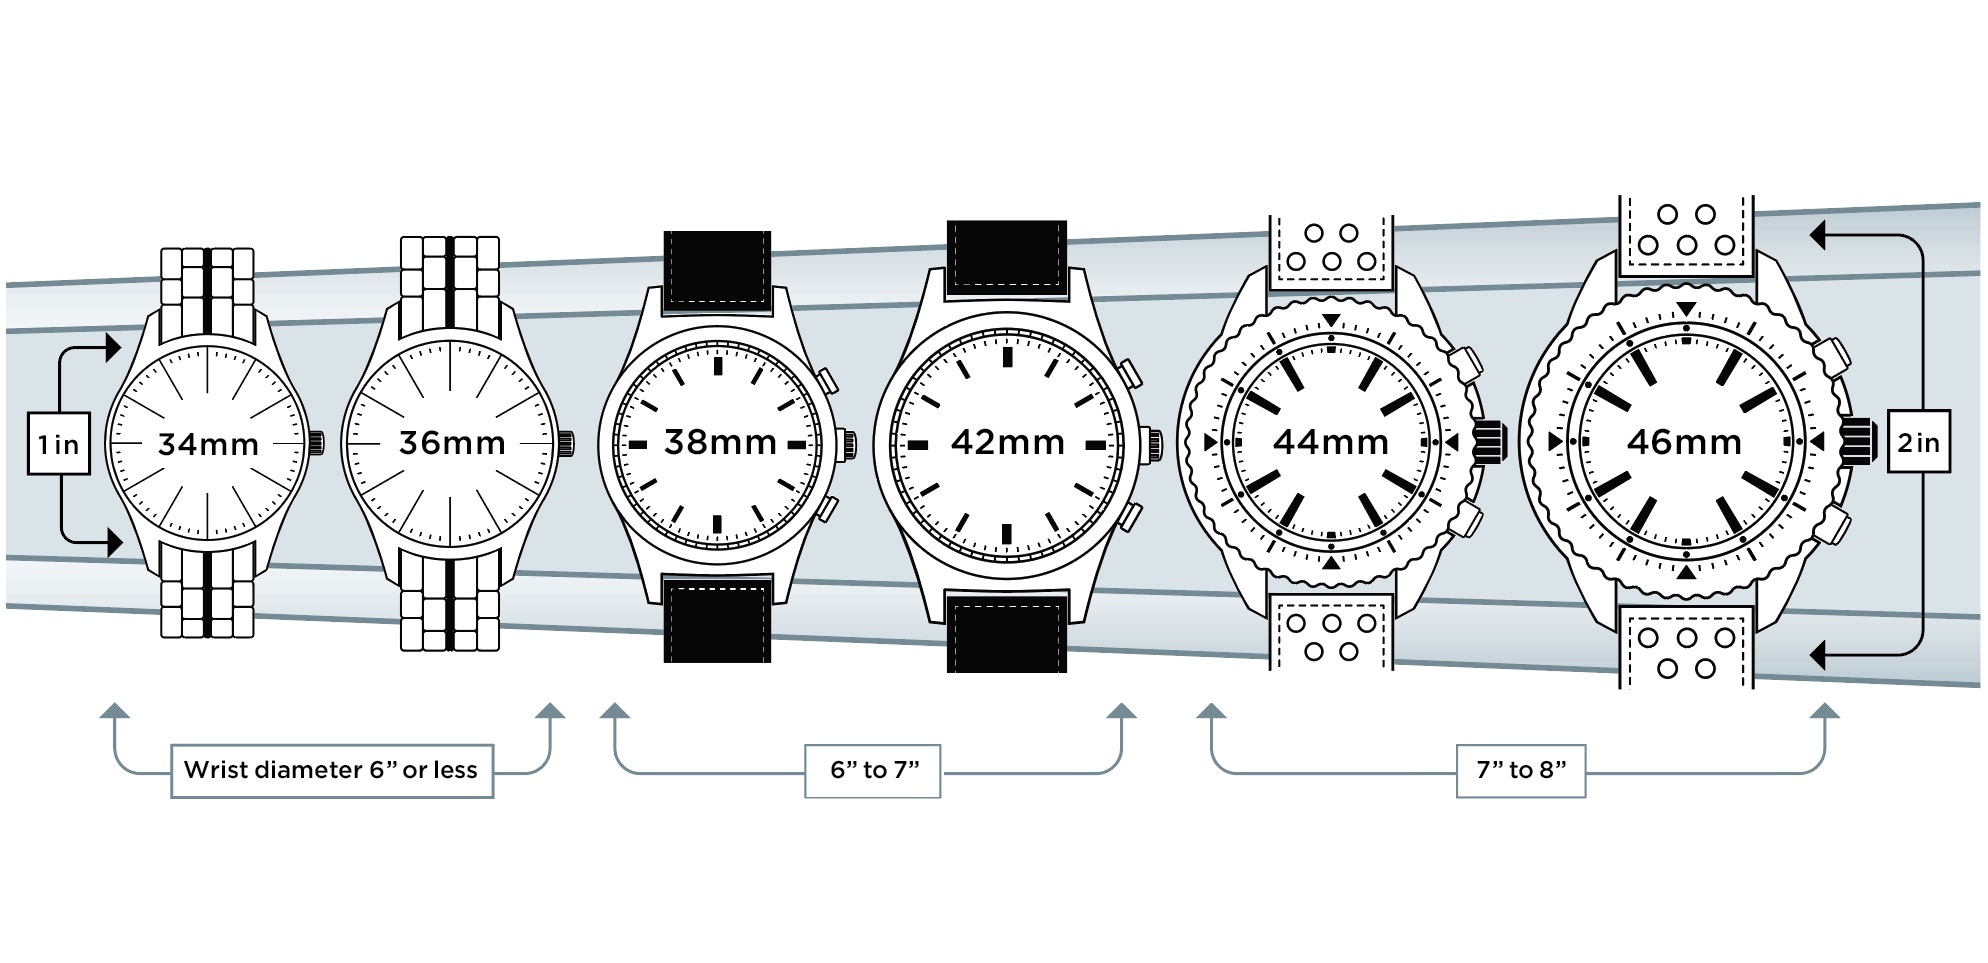 Watch Sizing Guide Govberg Jewelers